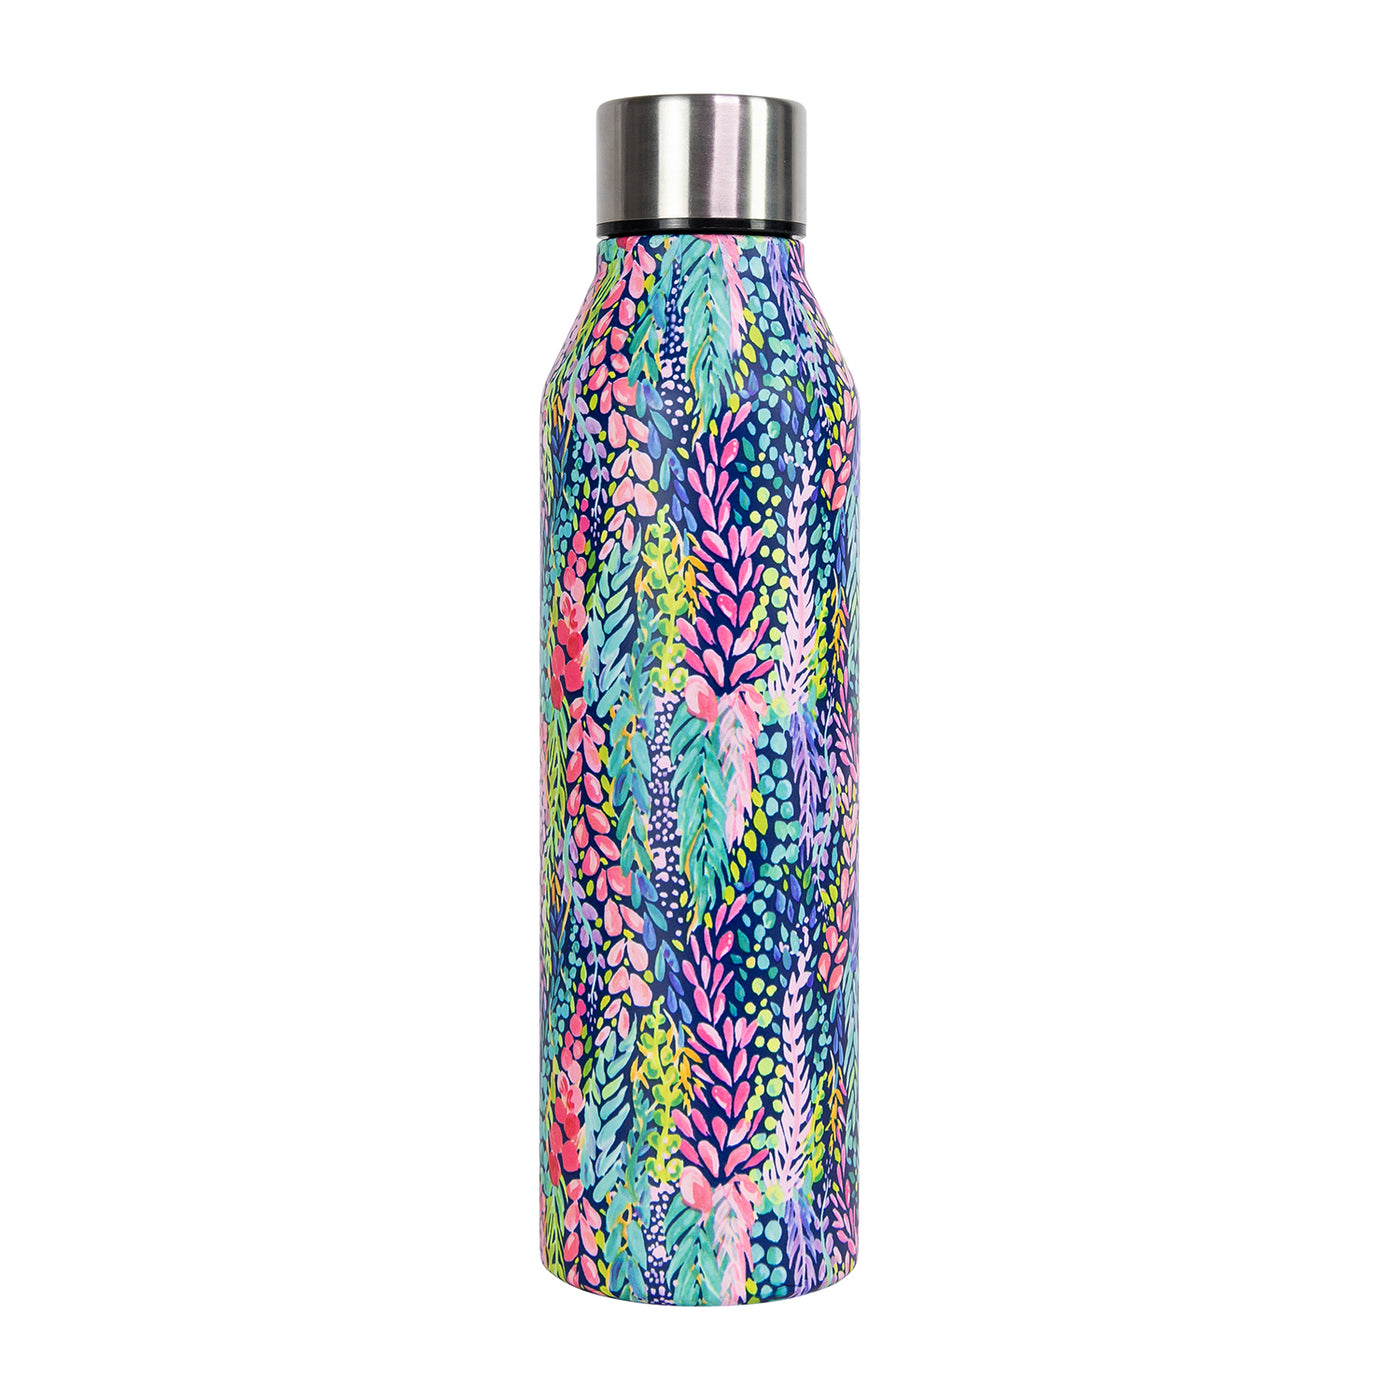 Wisteria Waves | Stainless Bottle - Mary Square, LLC